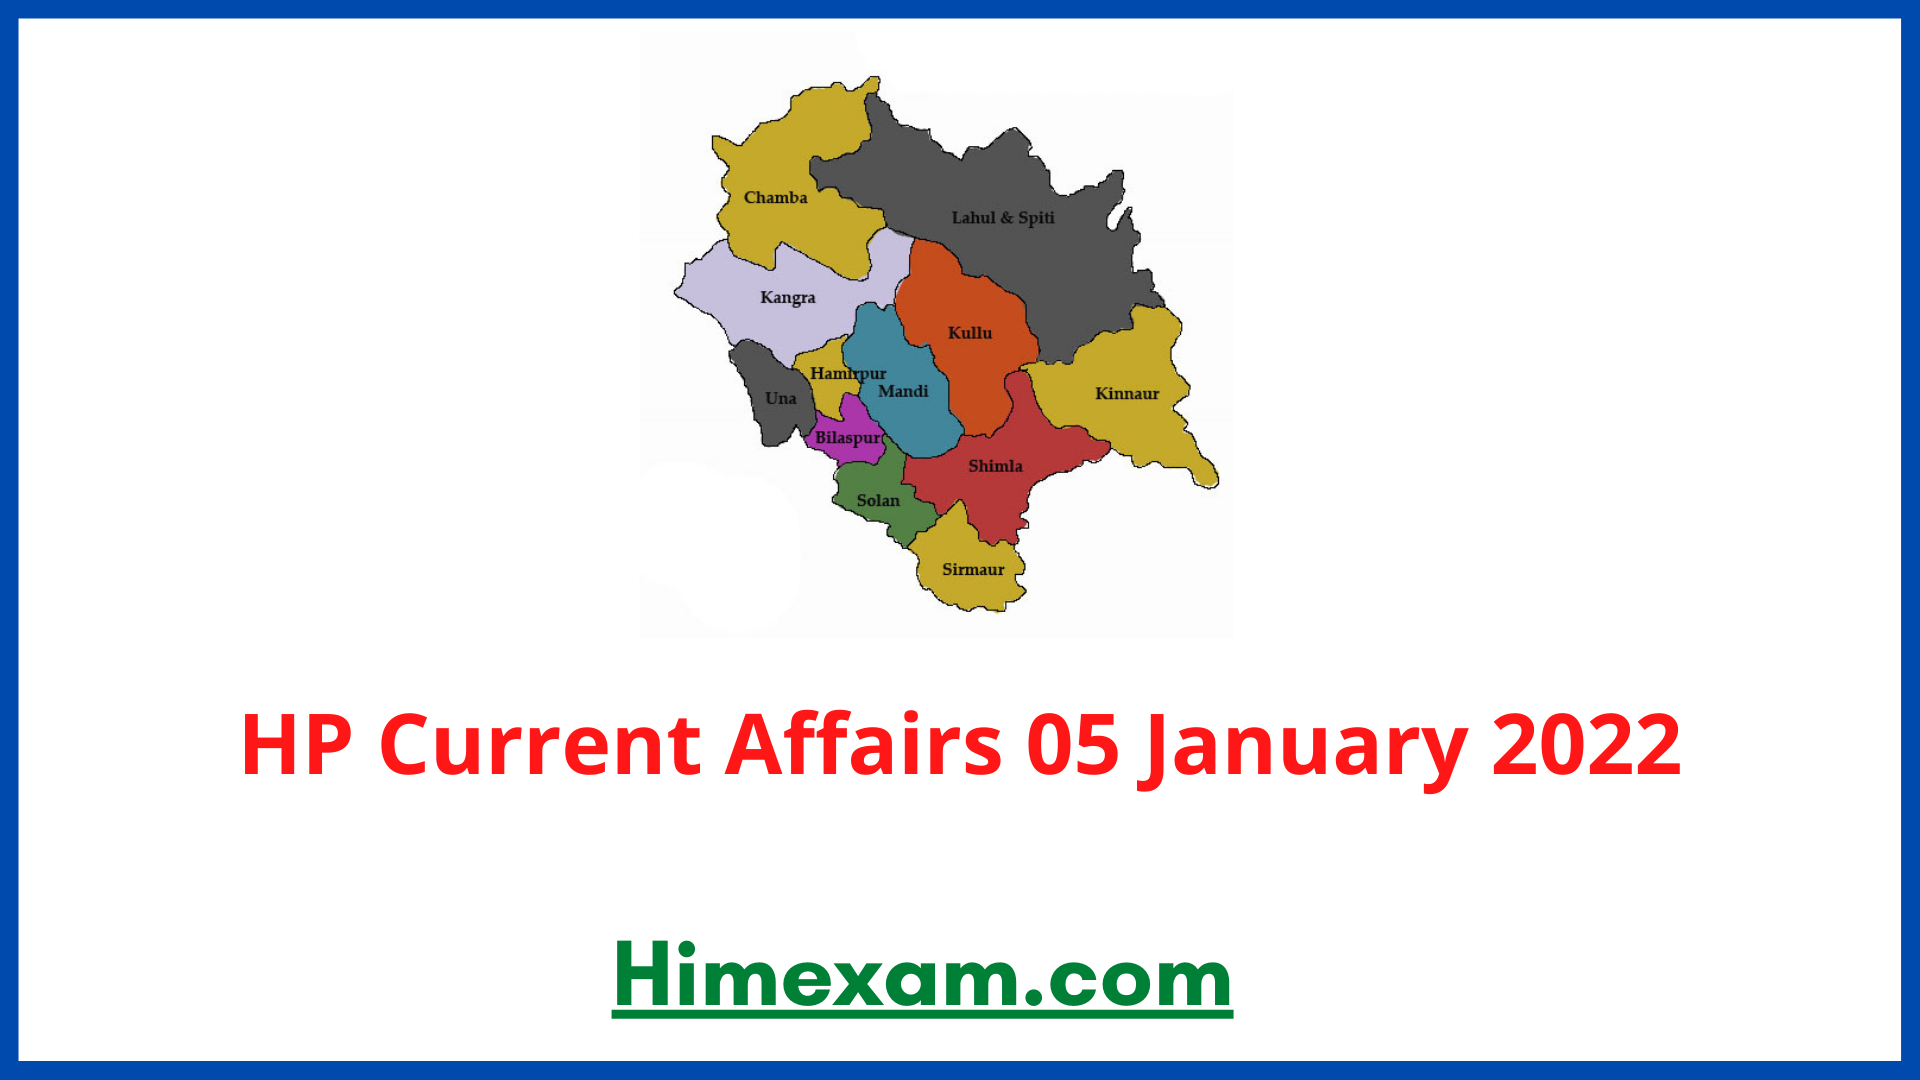 HP Current Affairs 05 January 2022